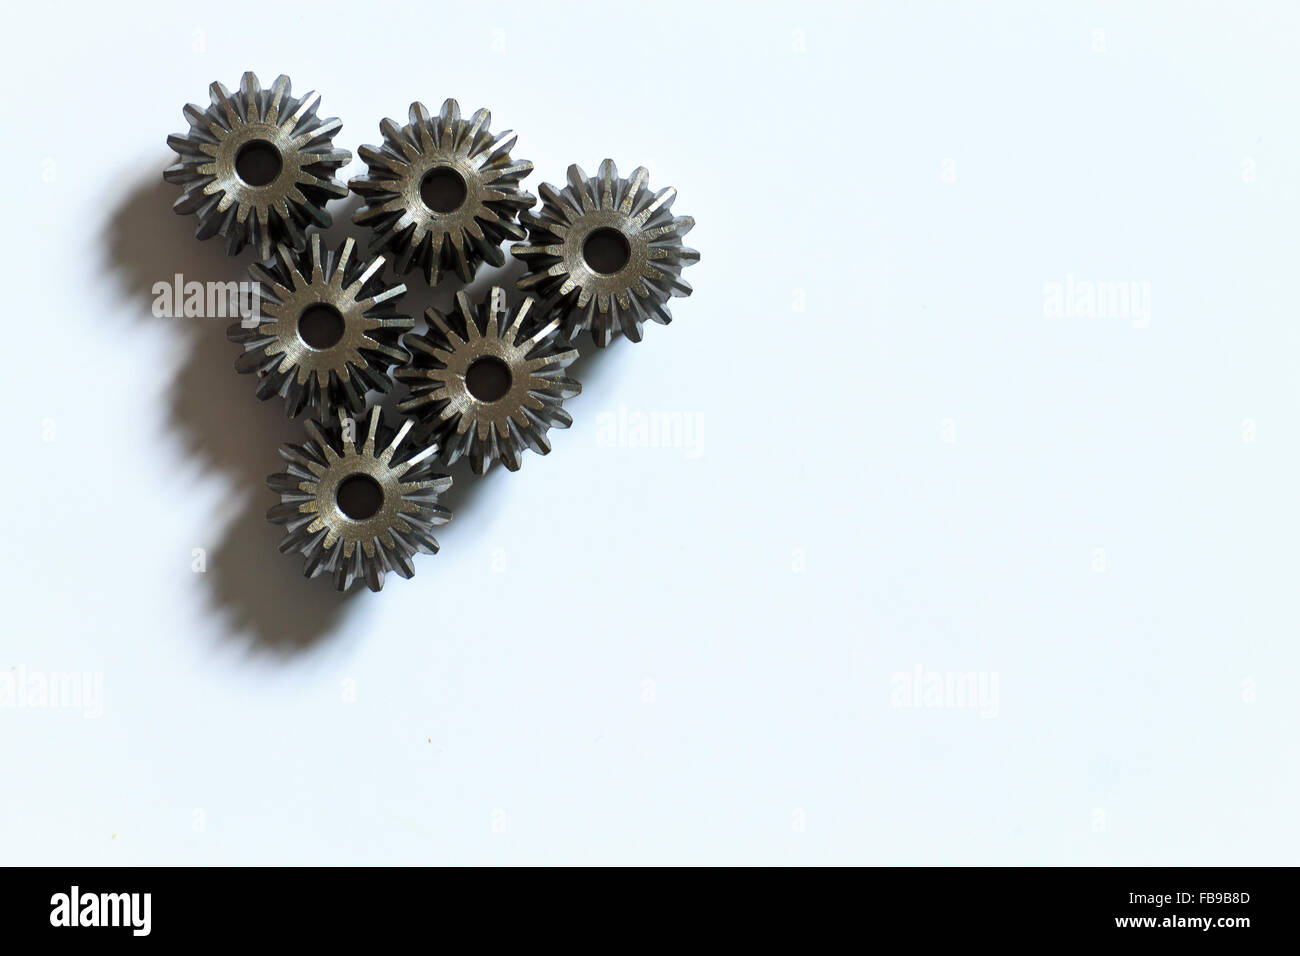 A background of mechanical components, gear, industrial objects Stock Photo